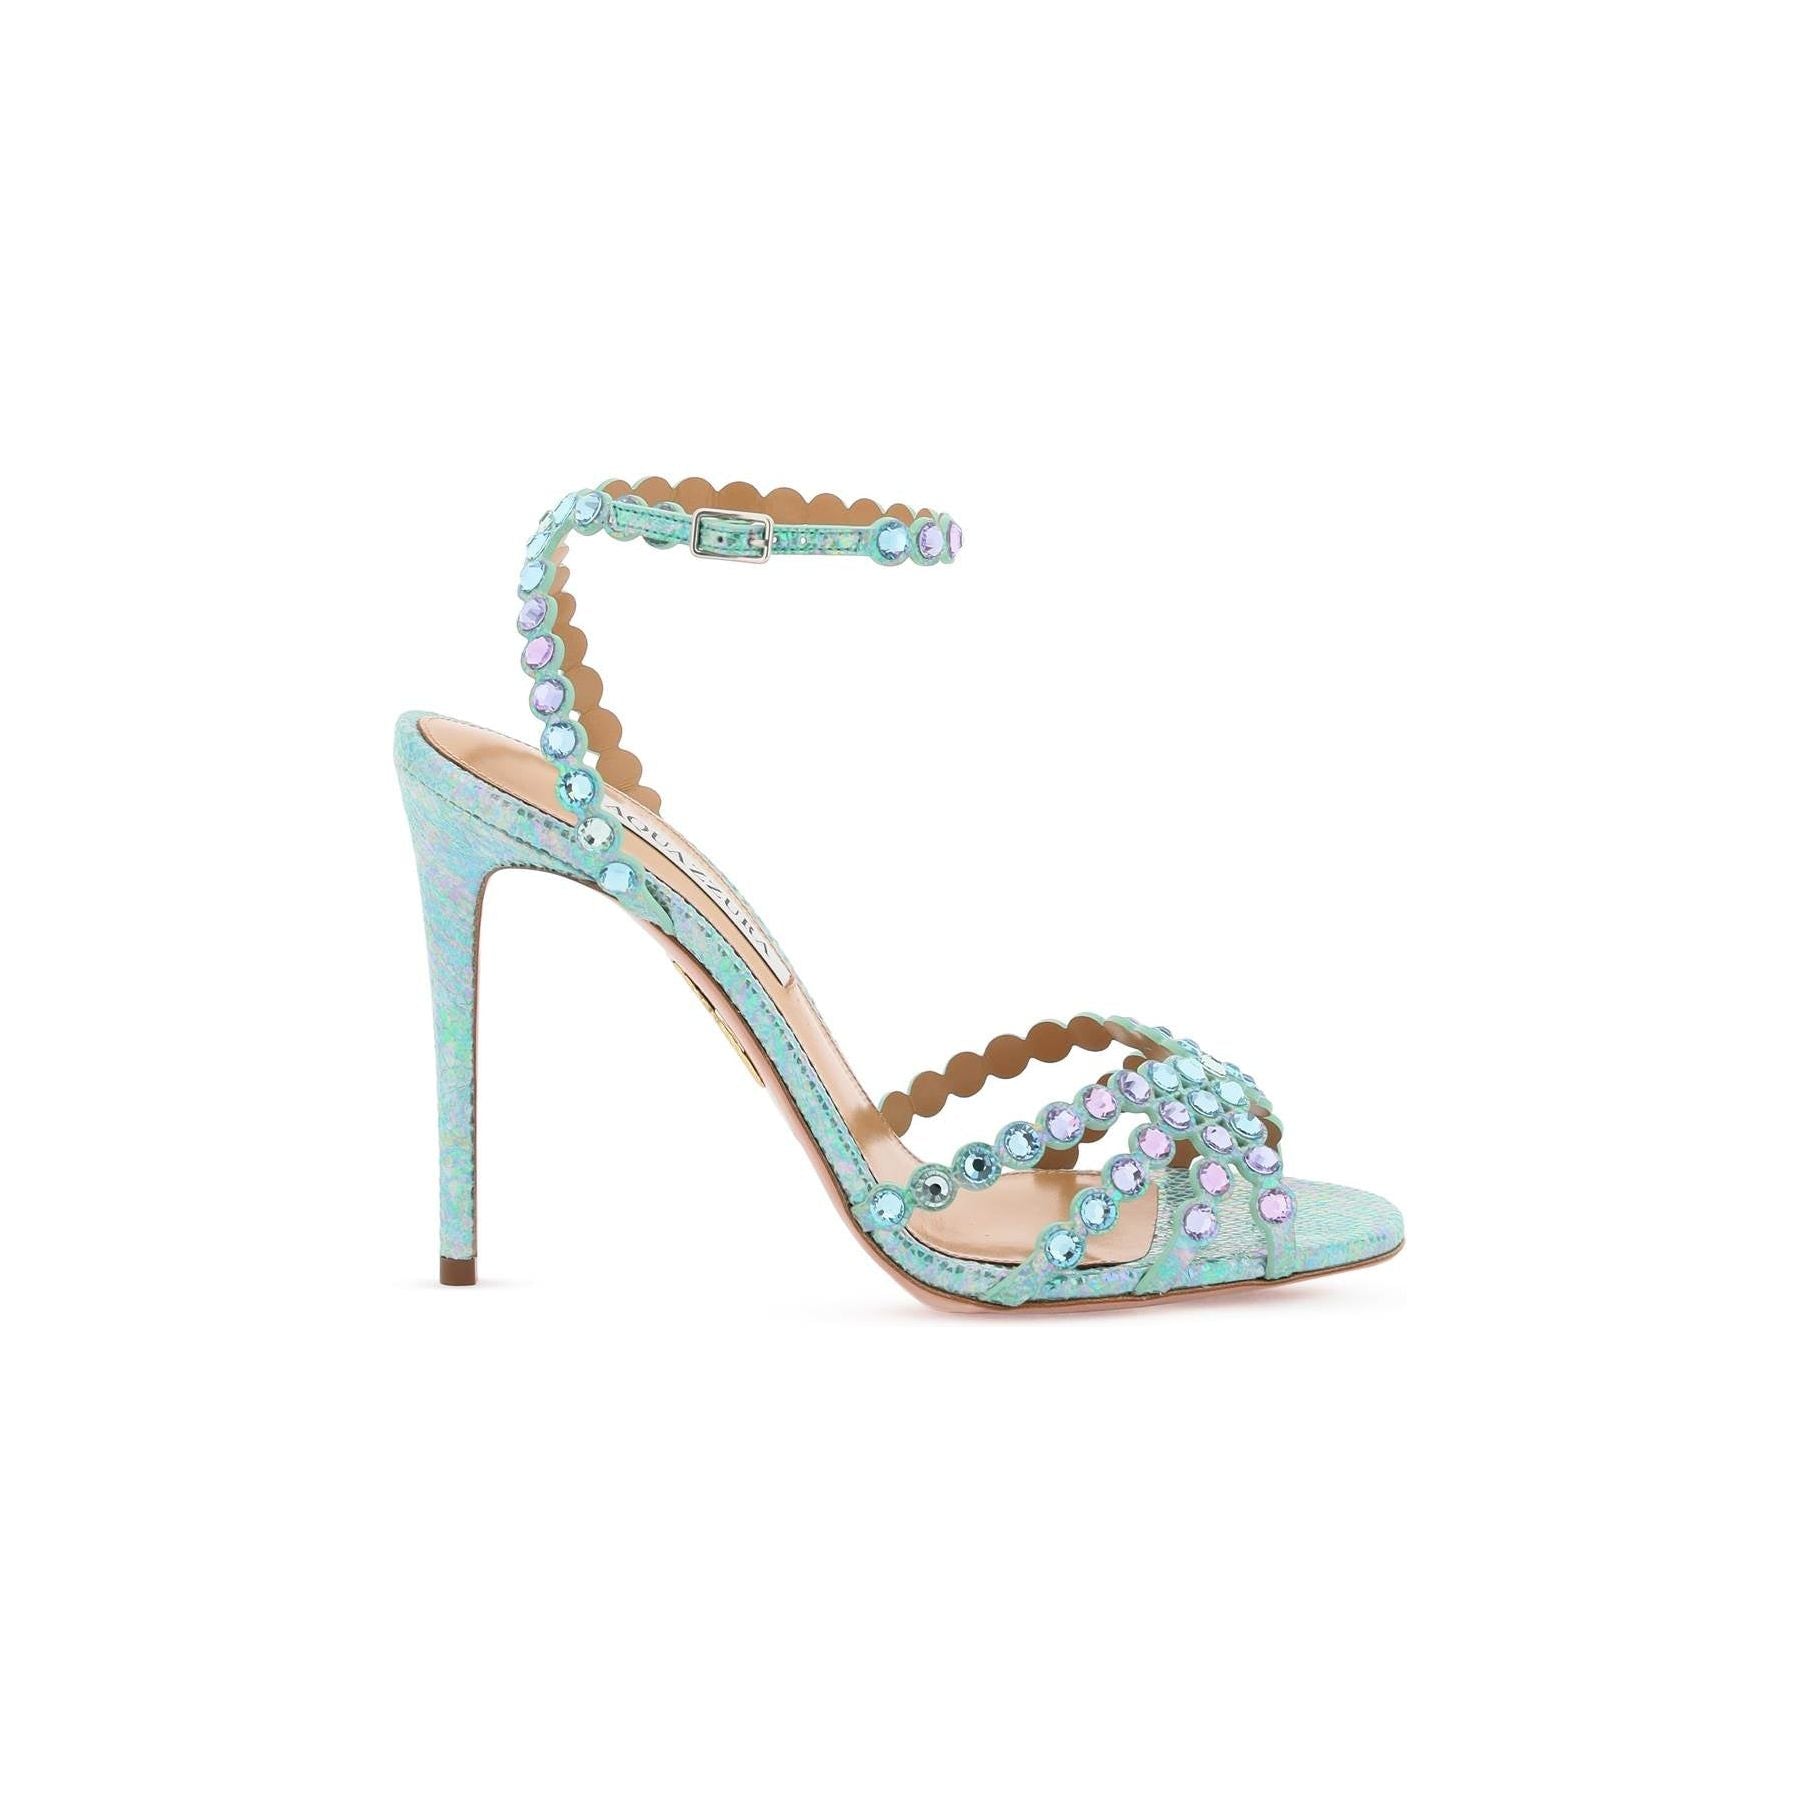 Tequila Crystal Sandals